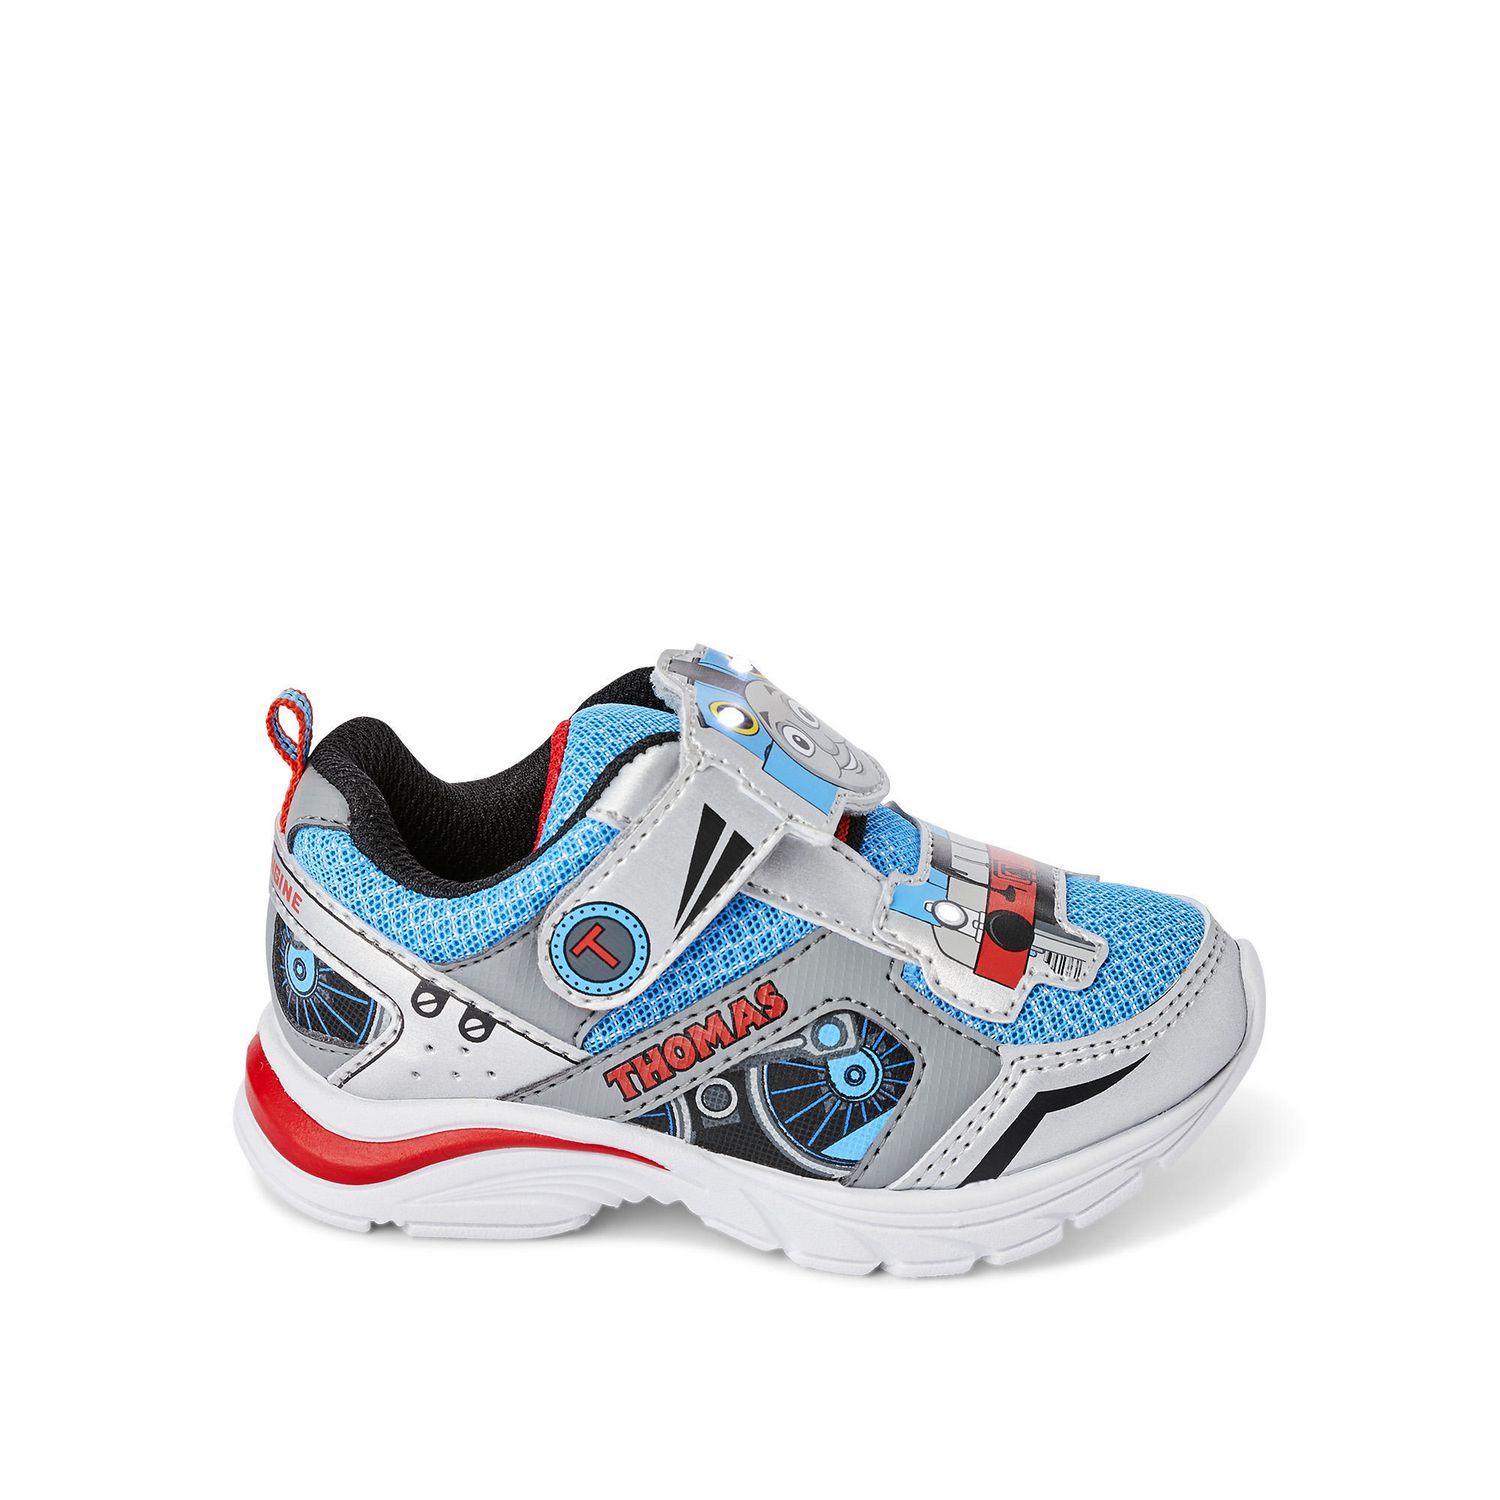 Thomas and Friends Thomas & Friends Toddler Boys' Sneakers | Walmart Canada